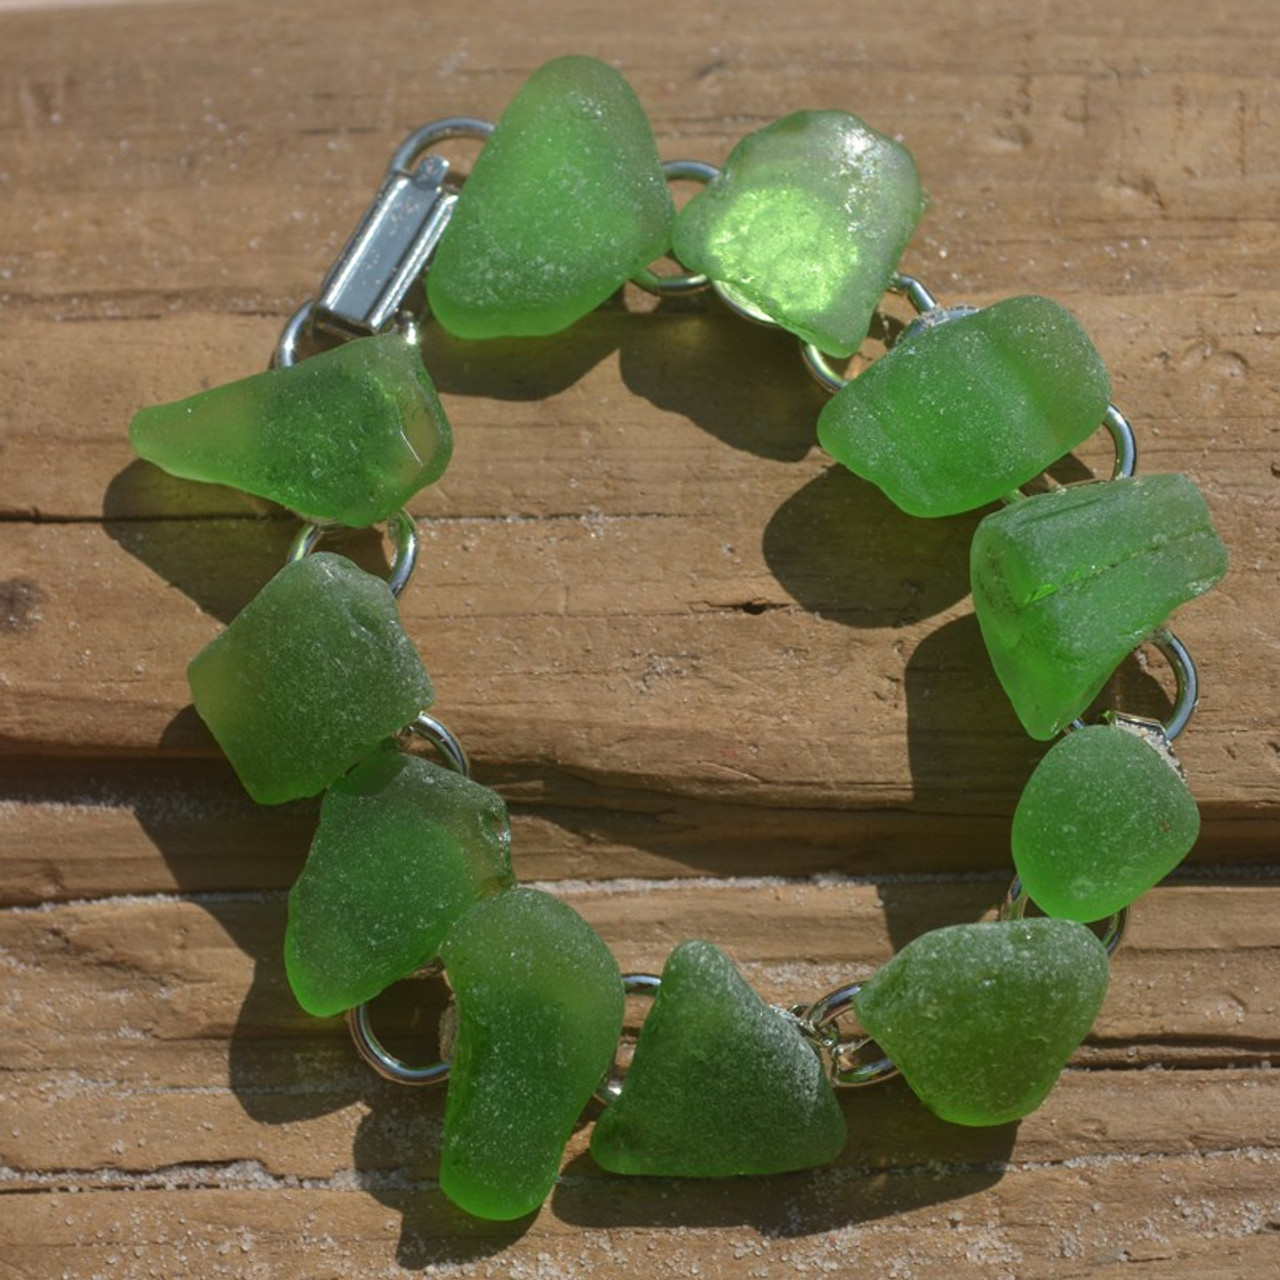 Genuine Kelly Green Sea Glass Bracelet - 3 Size Options - Made to Order